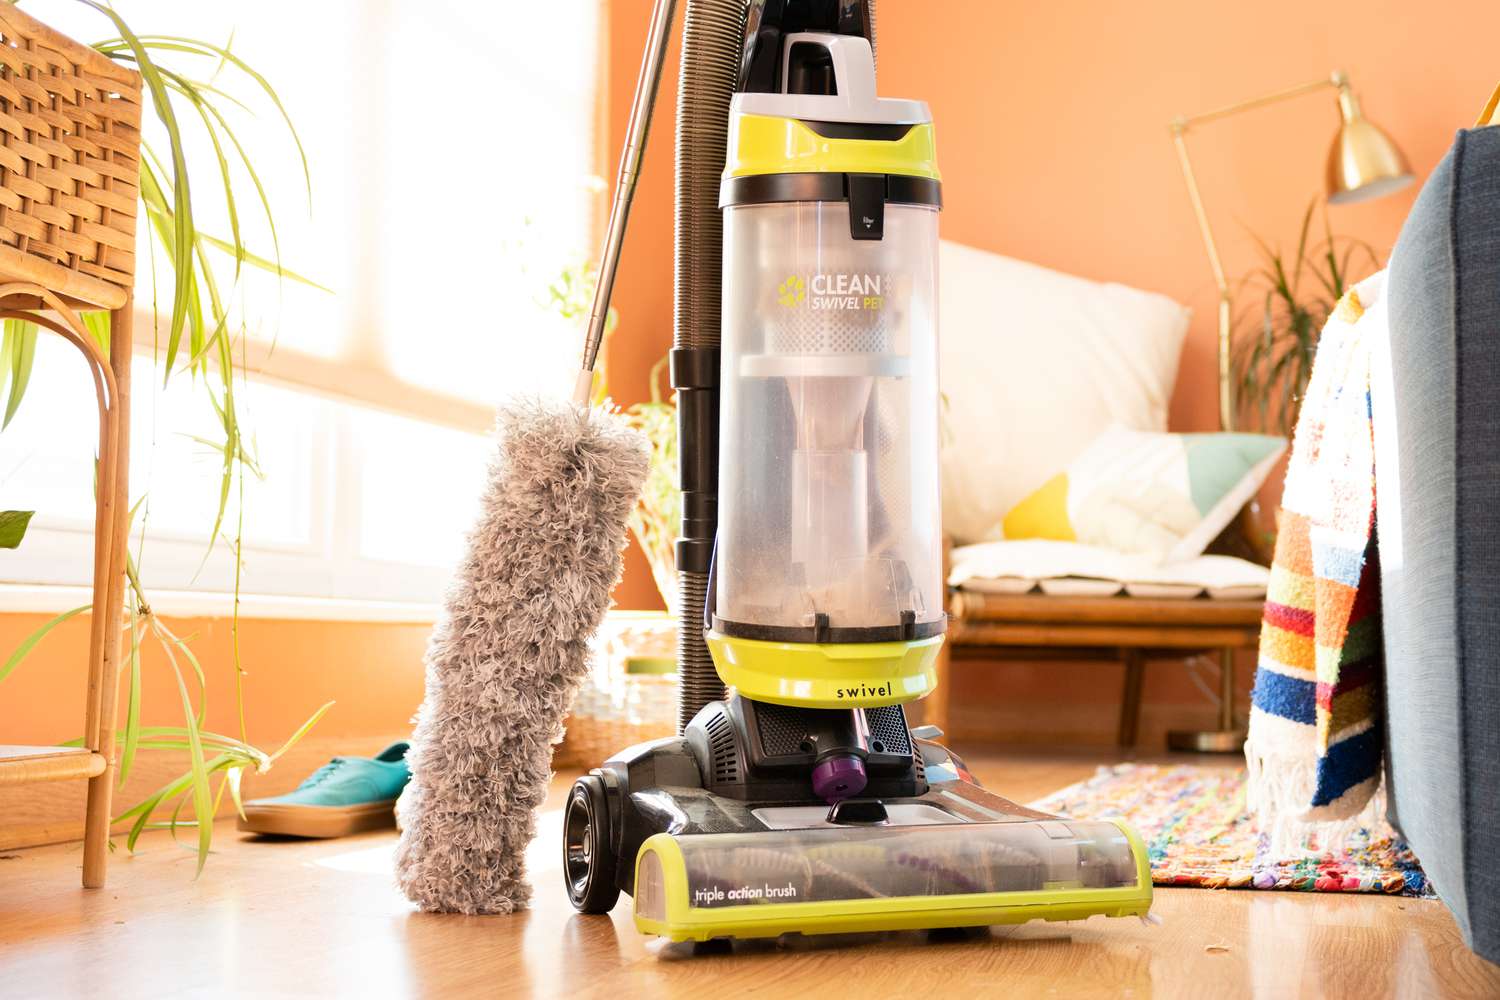 Do You Dust or Vacuum First When Cleaning?